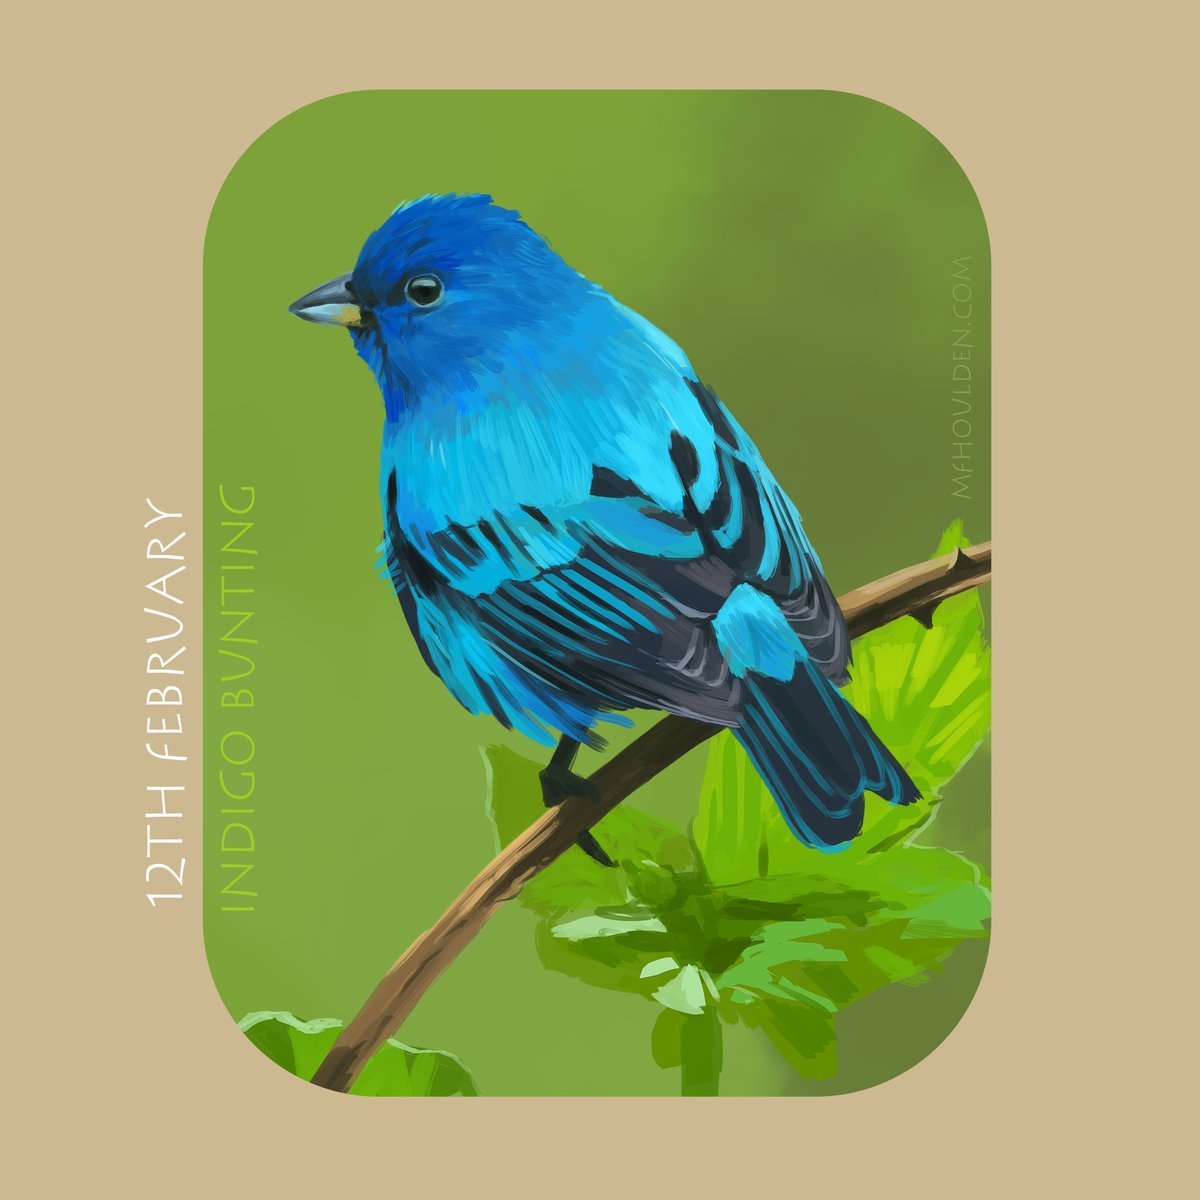 Day 42 2023 - February 11th - Indigo Bunting! Lovely to get a chance to do such punchy colours - would love to see one in real life! #art #noai #humanartist #birds #natureart #digitalart #birdillustration #cute #biodiversity #artnature #bunting #birbs